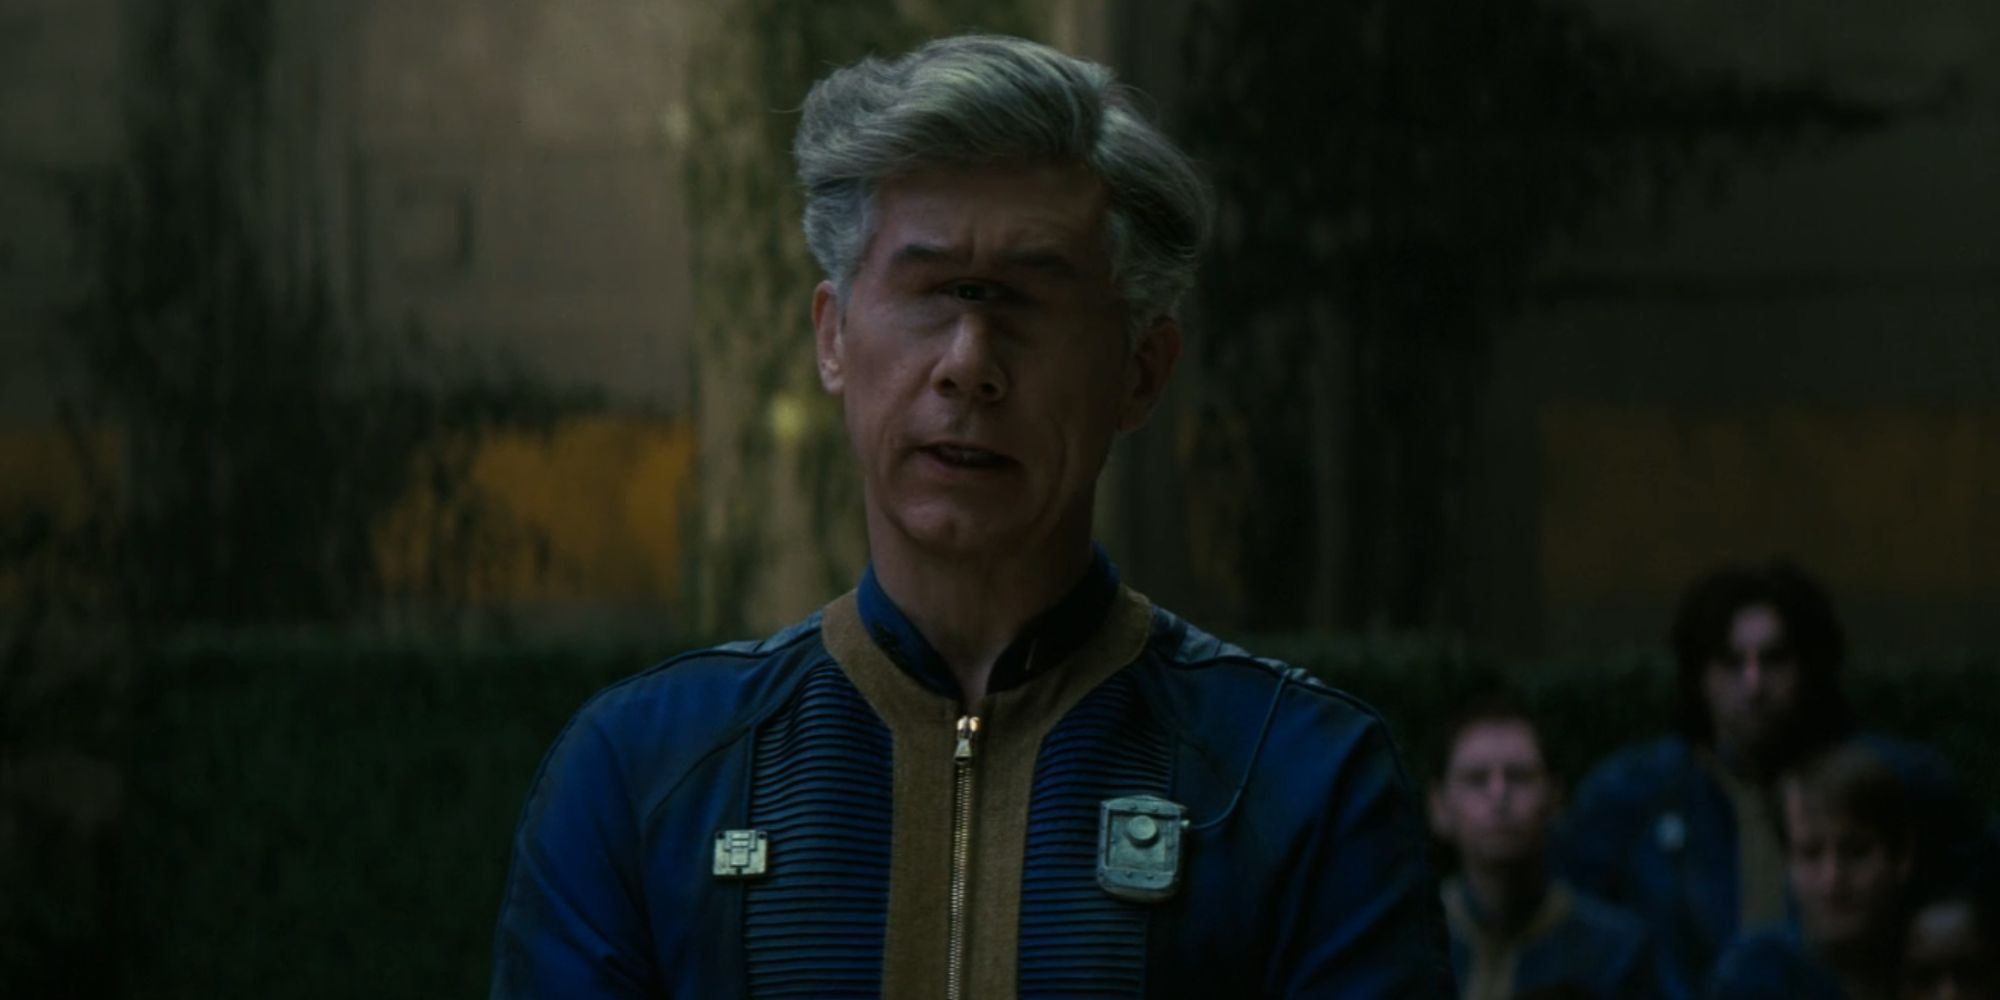 Chris Parnell as Overseer Benjamin in Fallout in the dark looking serious